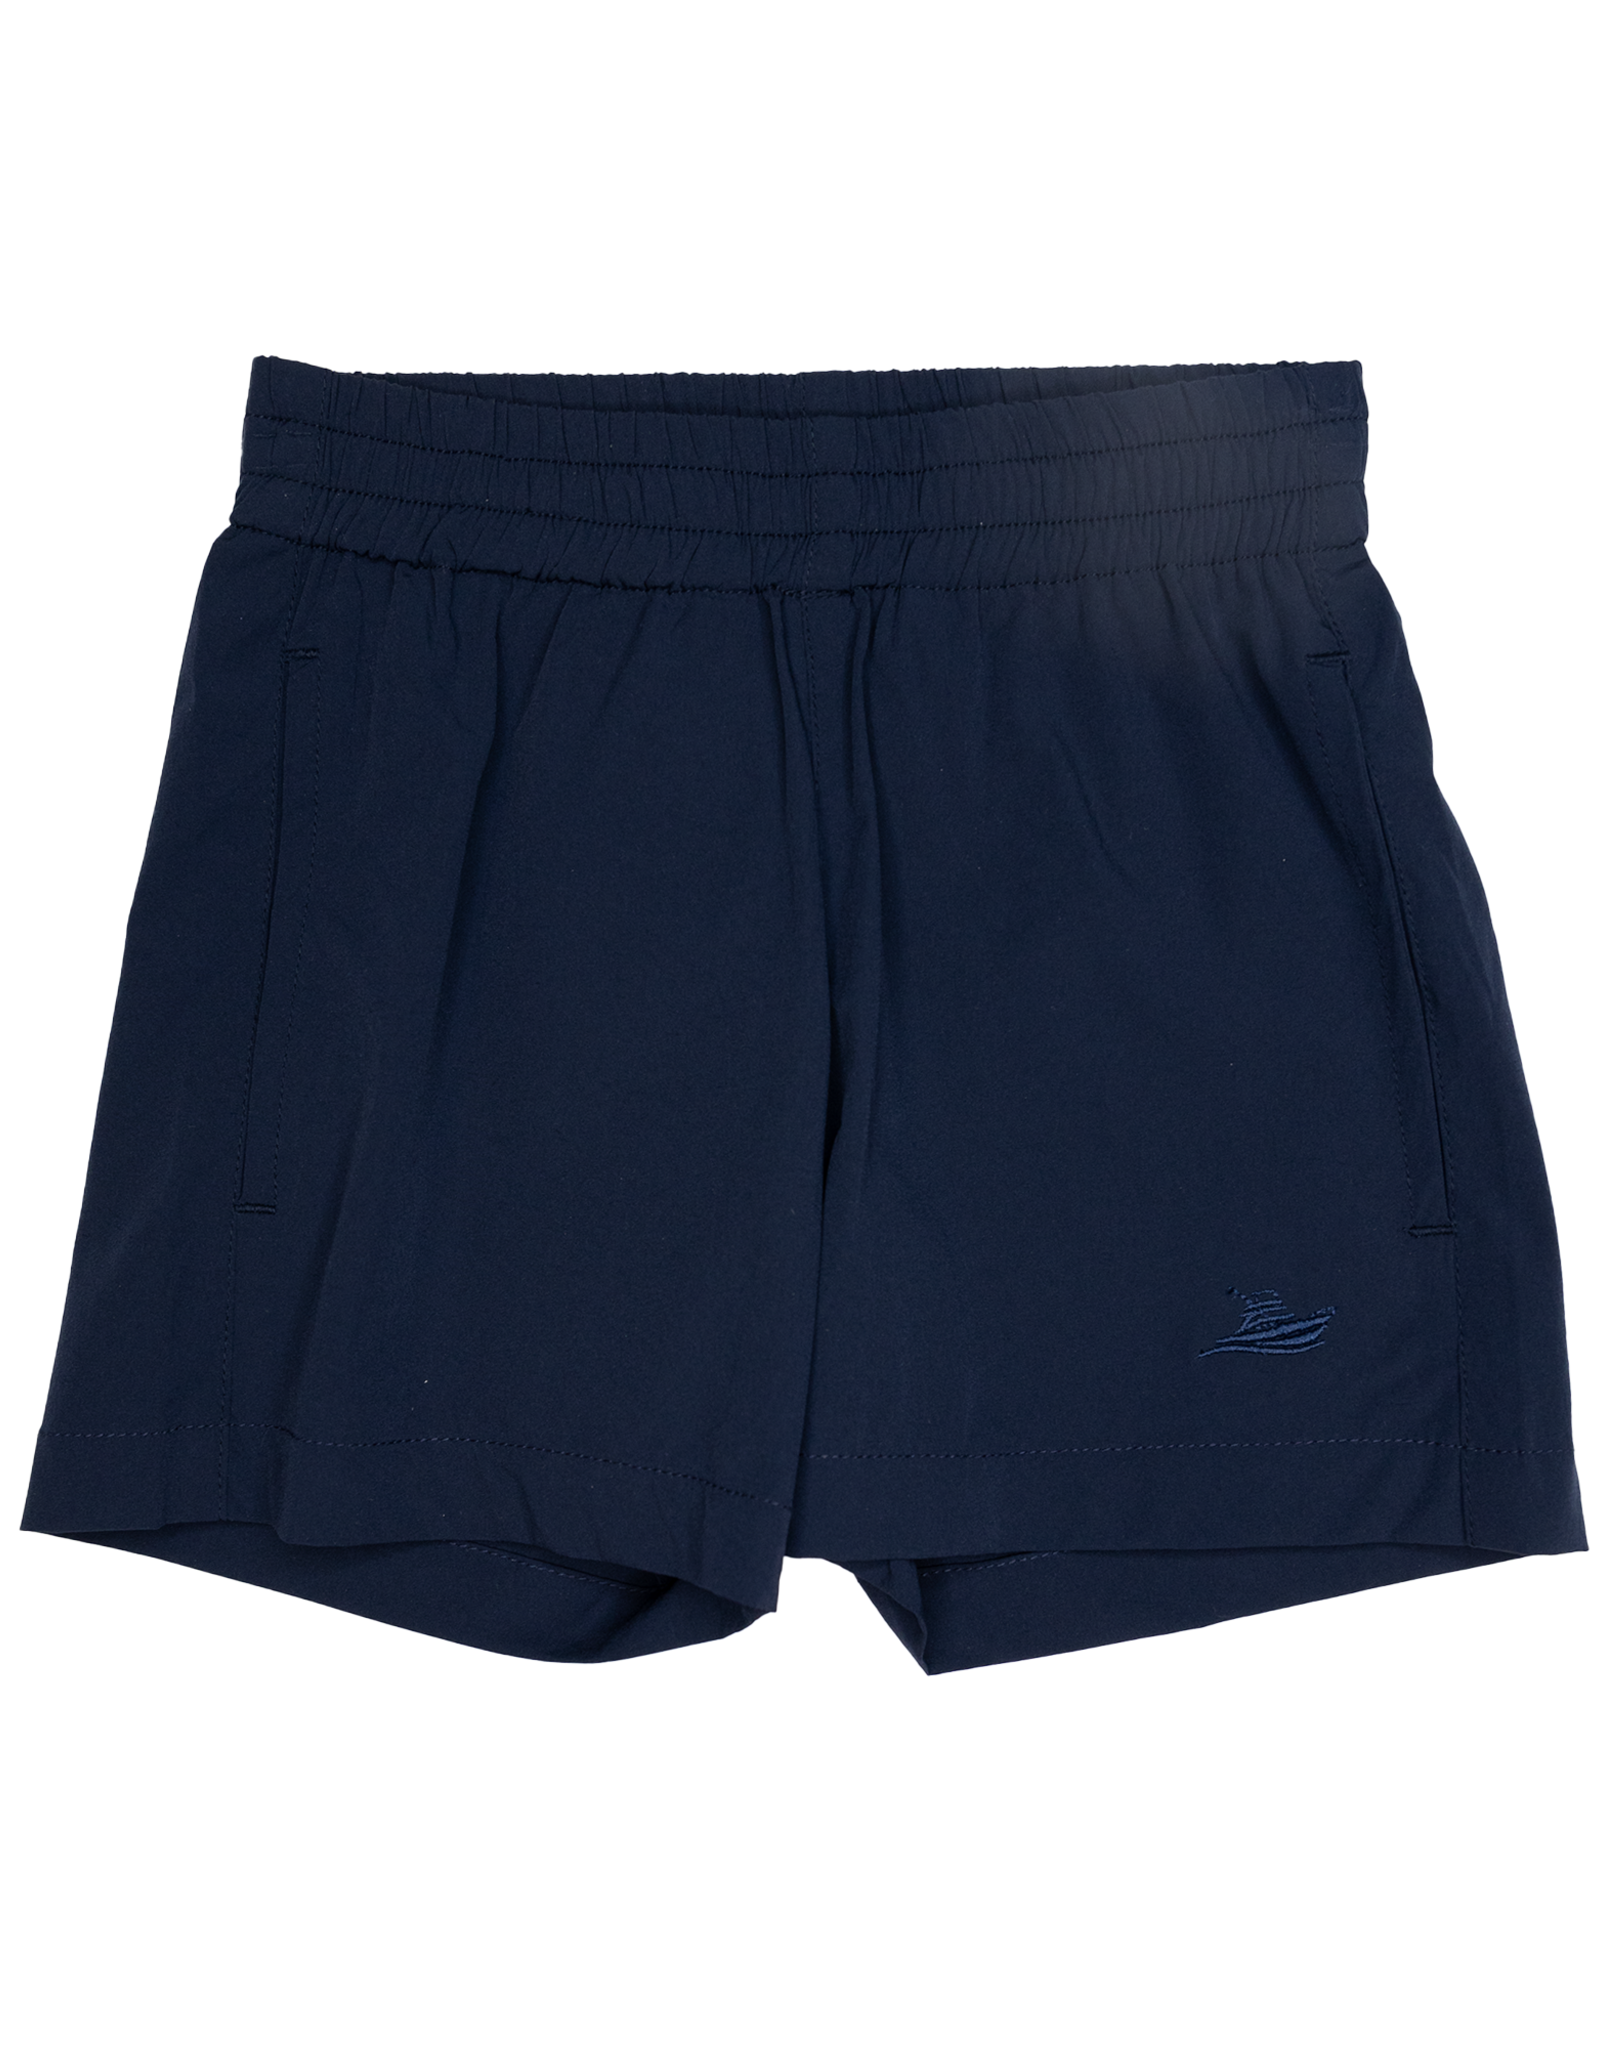 South Bound 3320 Performance Play Short Navy